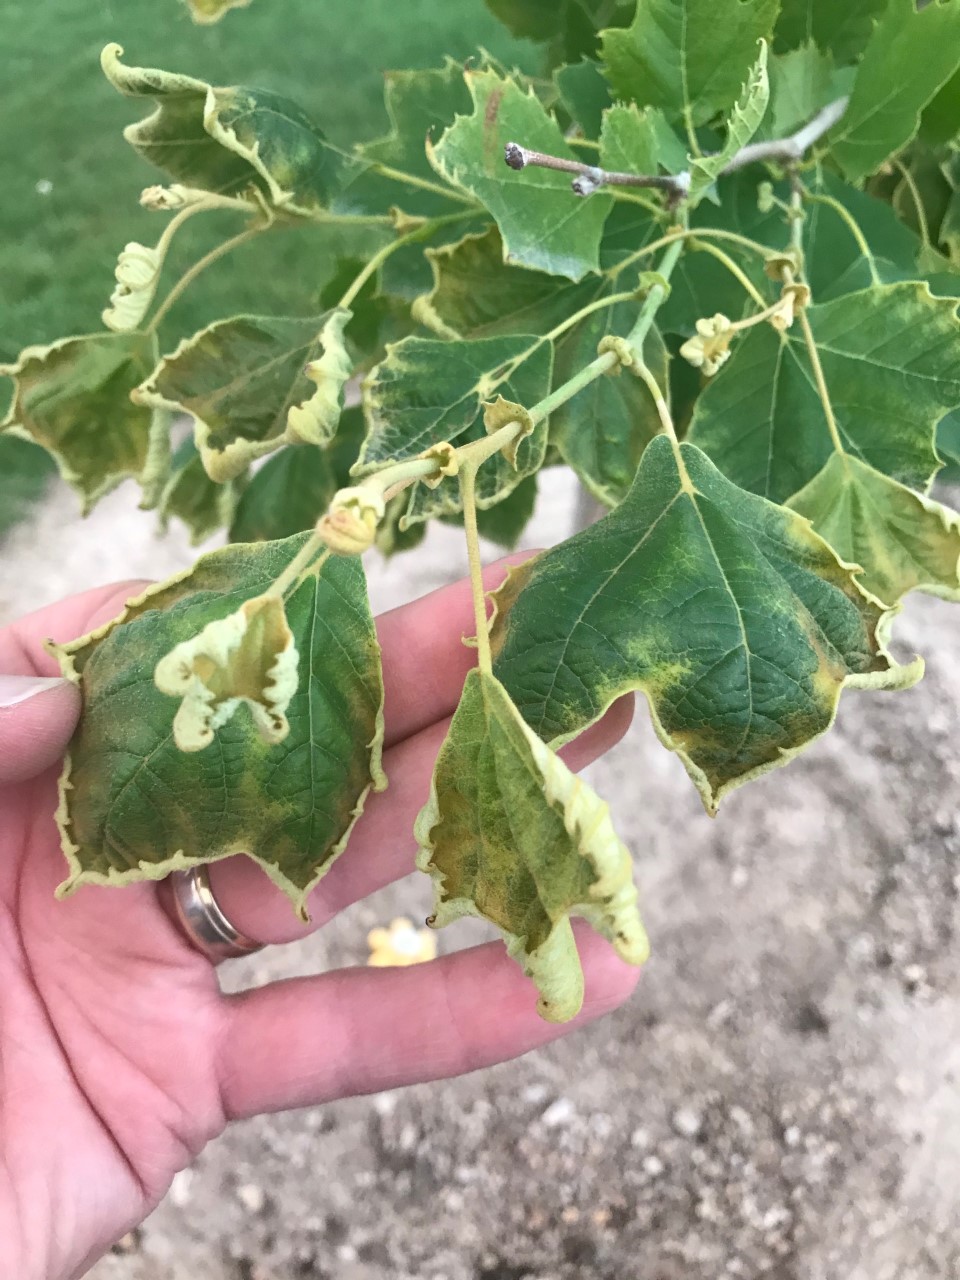 London Planetree leaves with yellow, holey centers